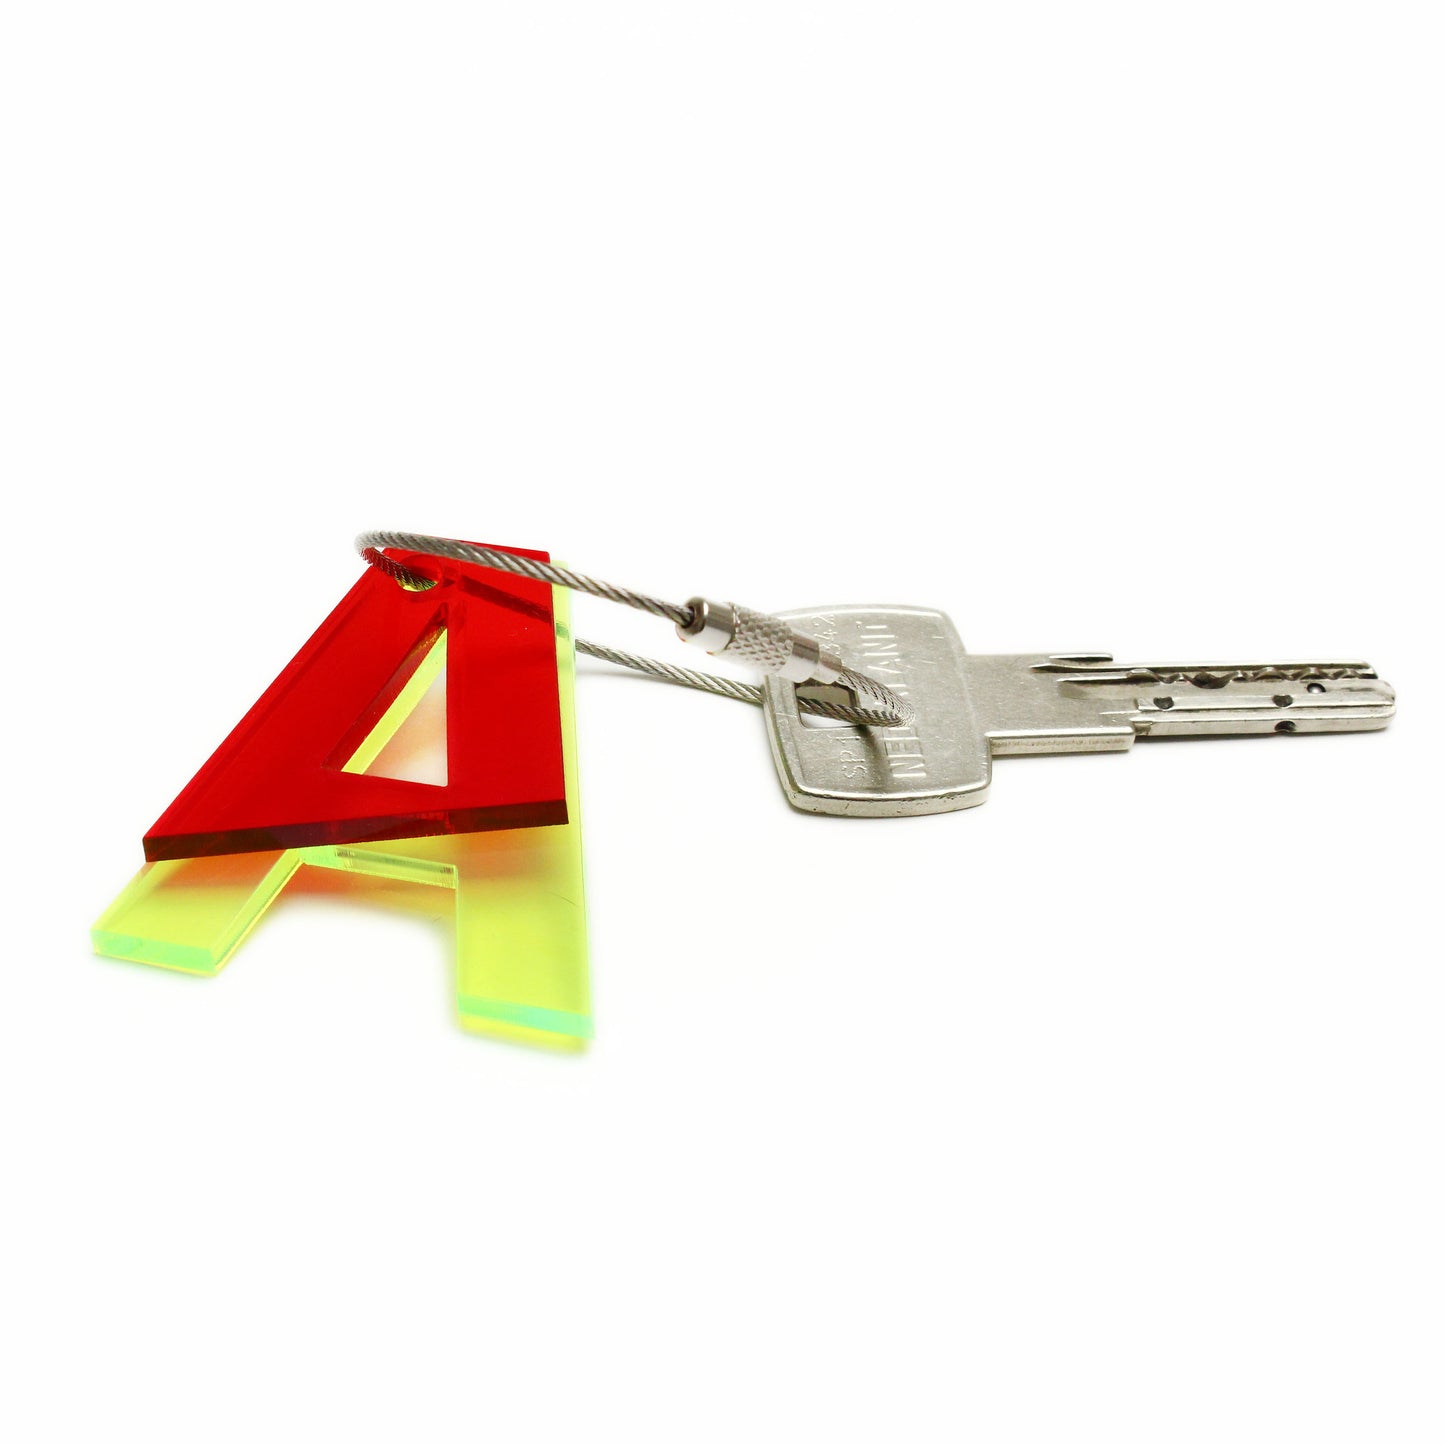 A – RECYCLED KEY CHAIN ABC by mo man tai